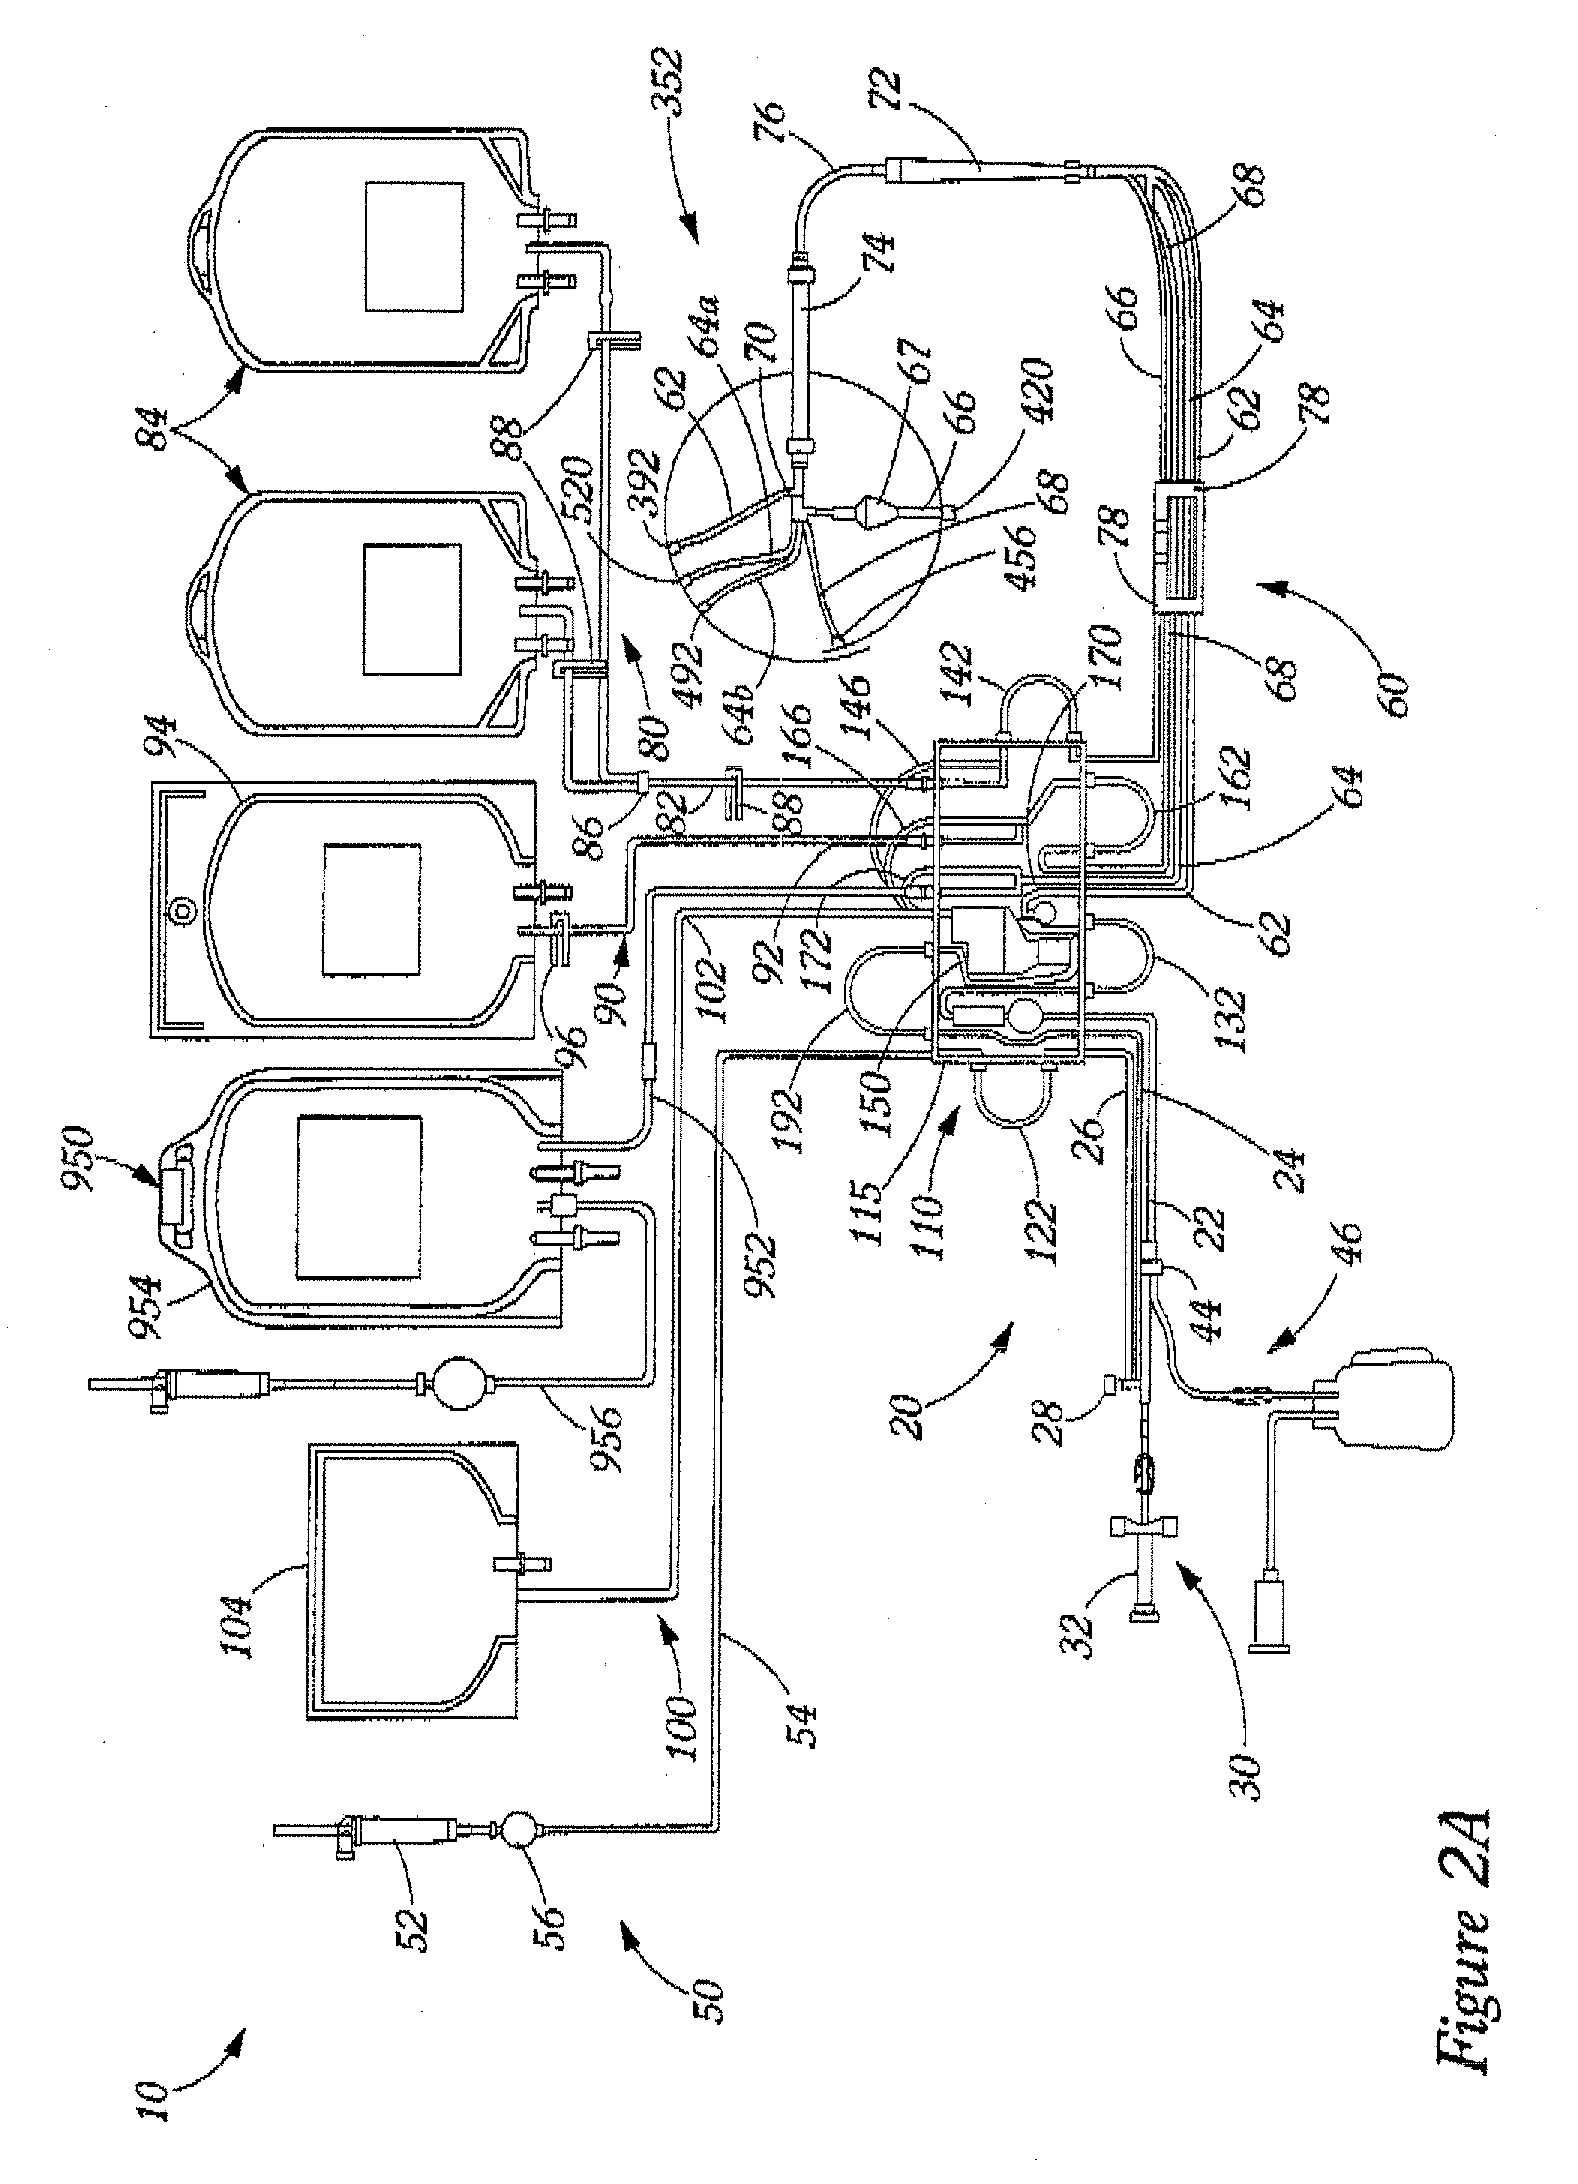 Extracorporeal Blood Processing Methods With Multiple Alarm Levels